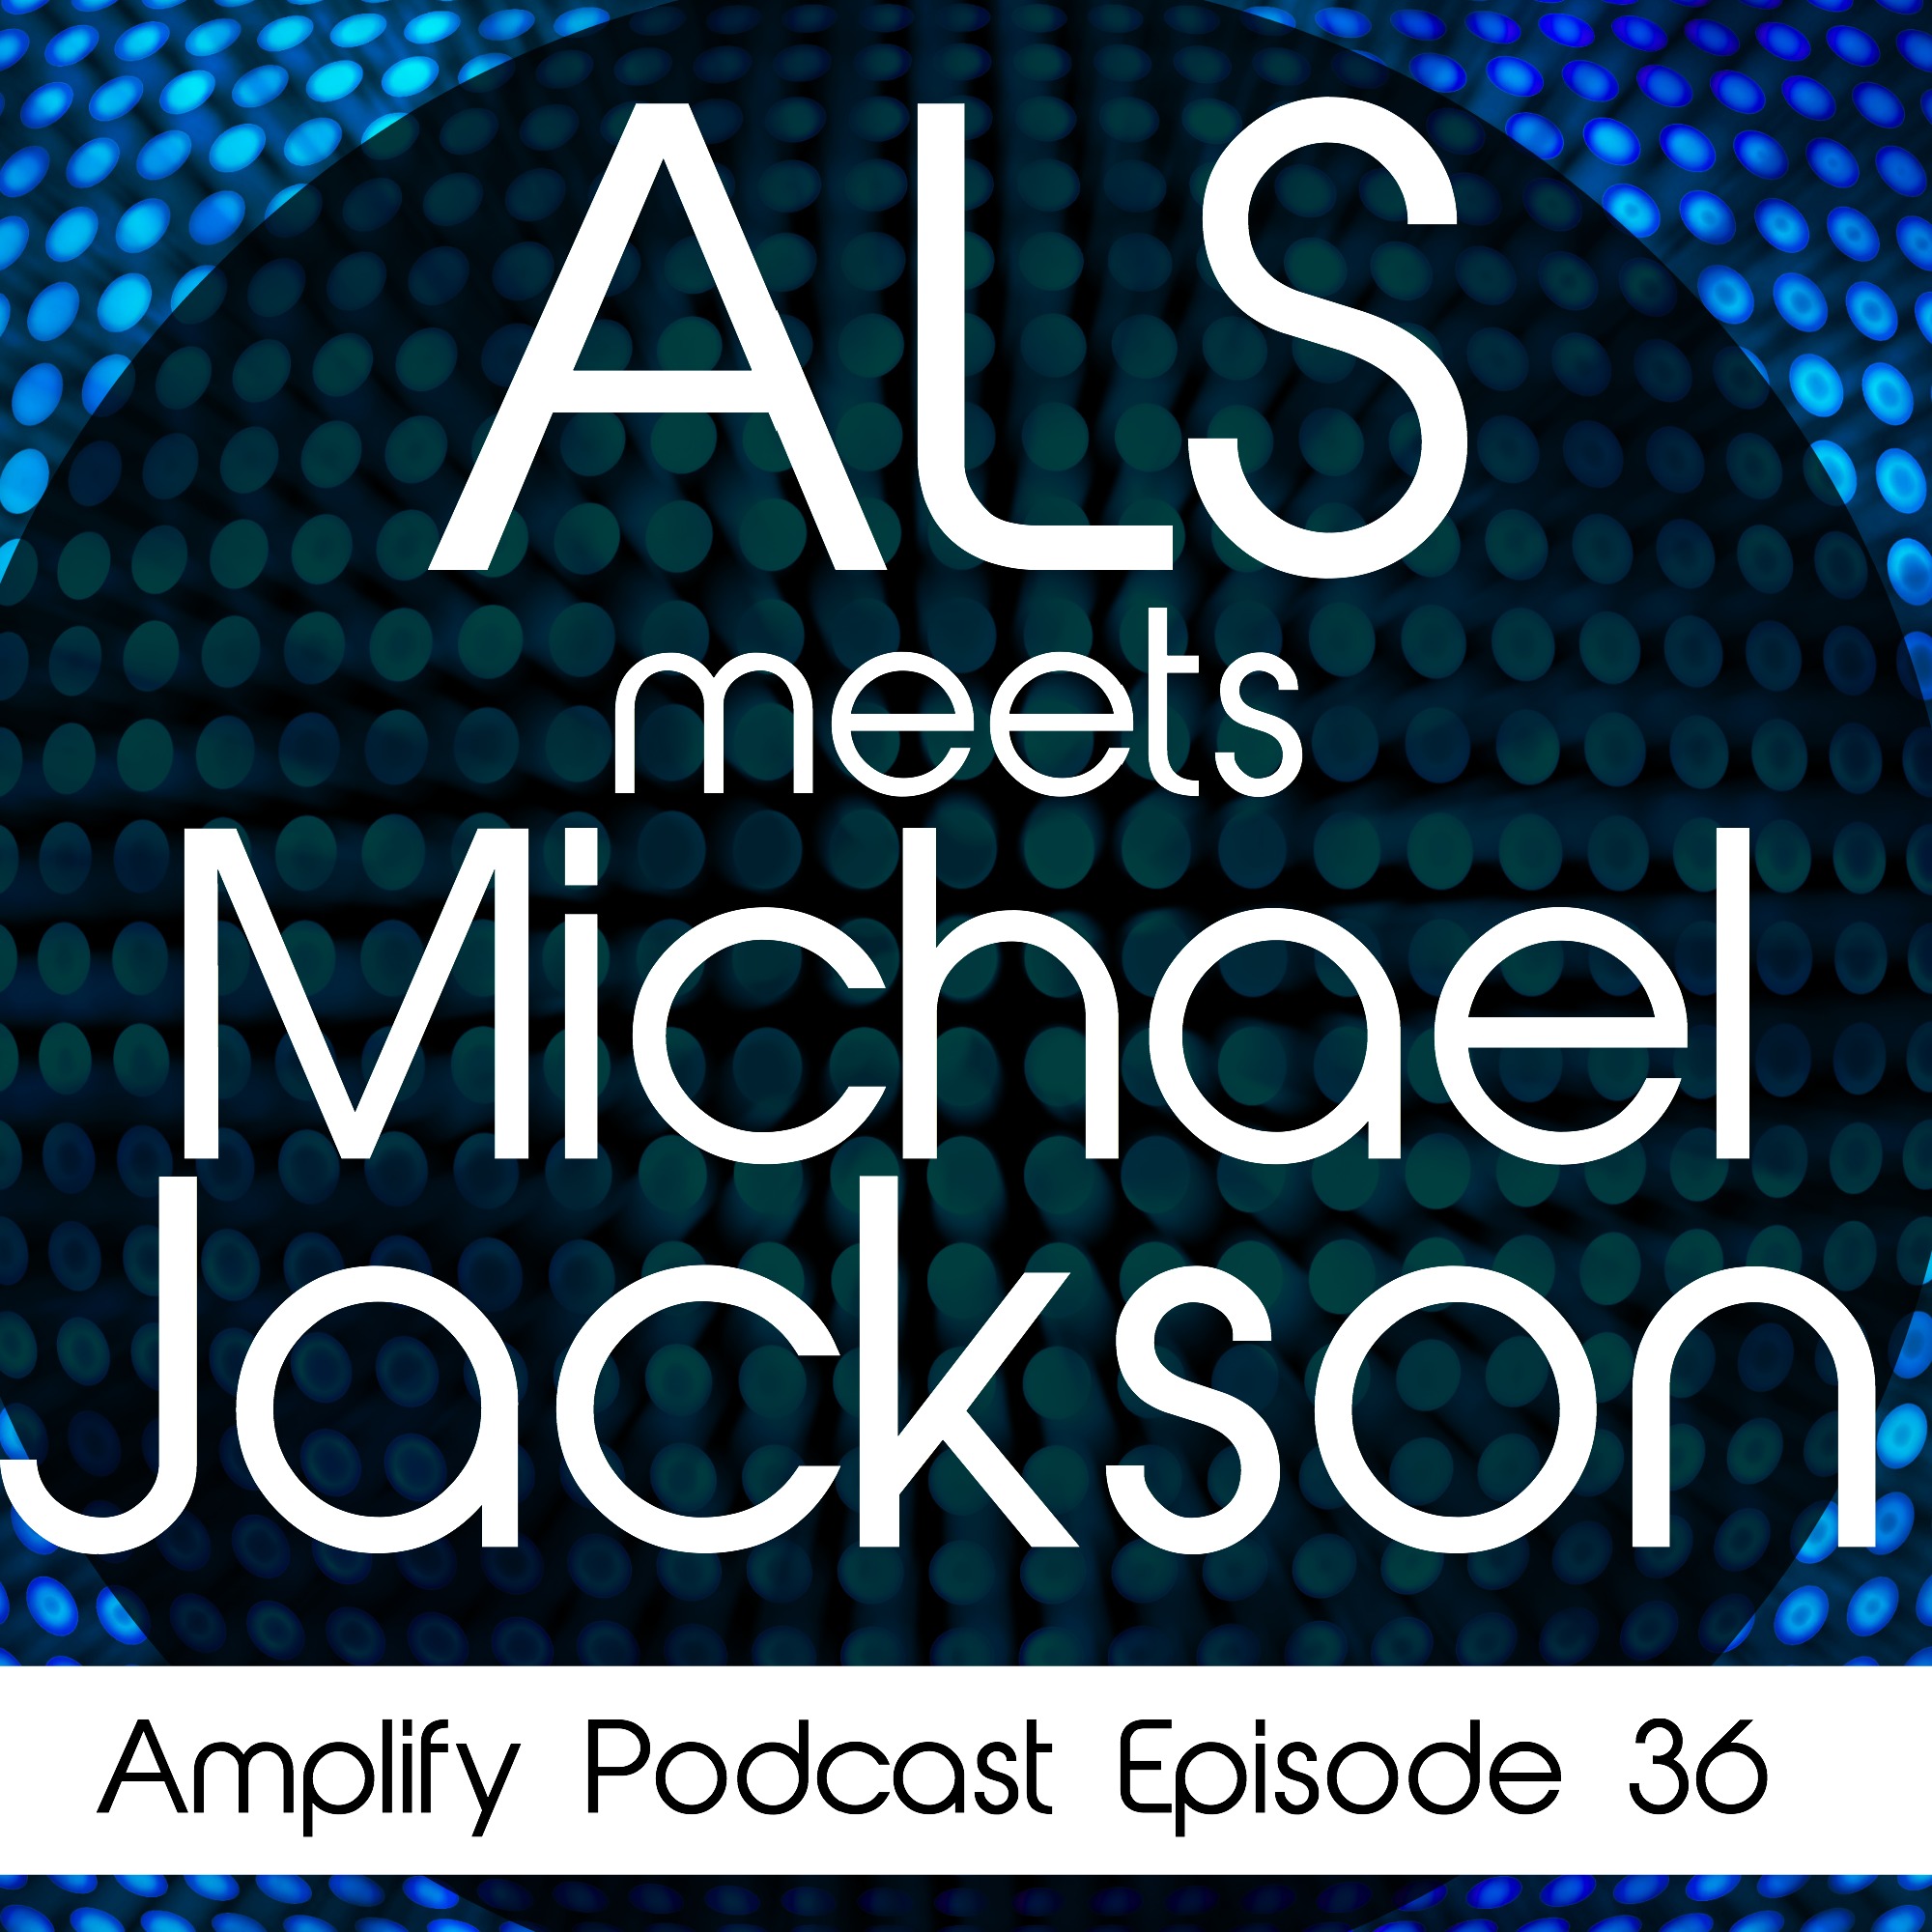 You are currently viewing ALS meets Michael Jackson